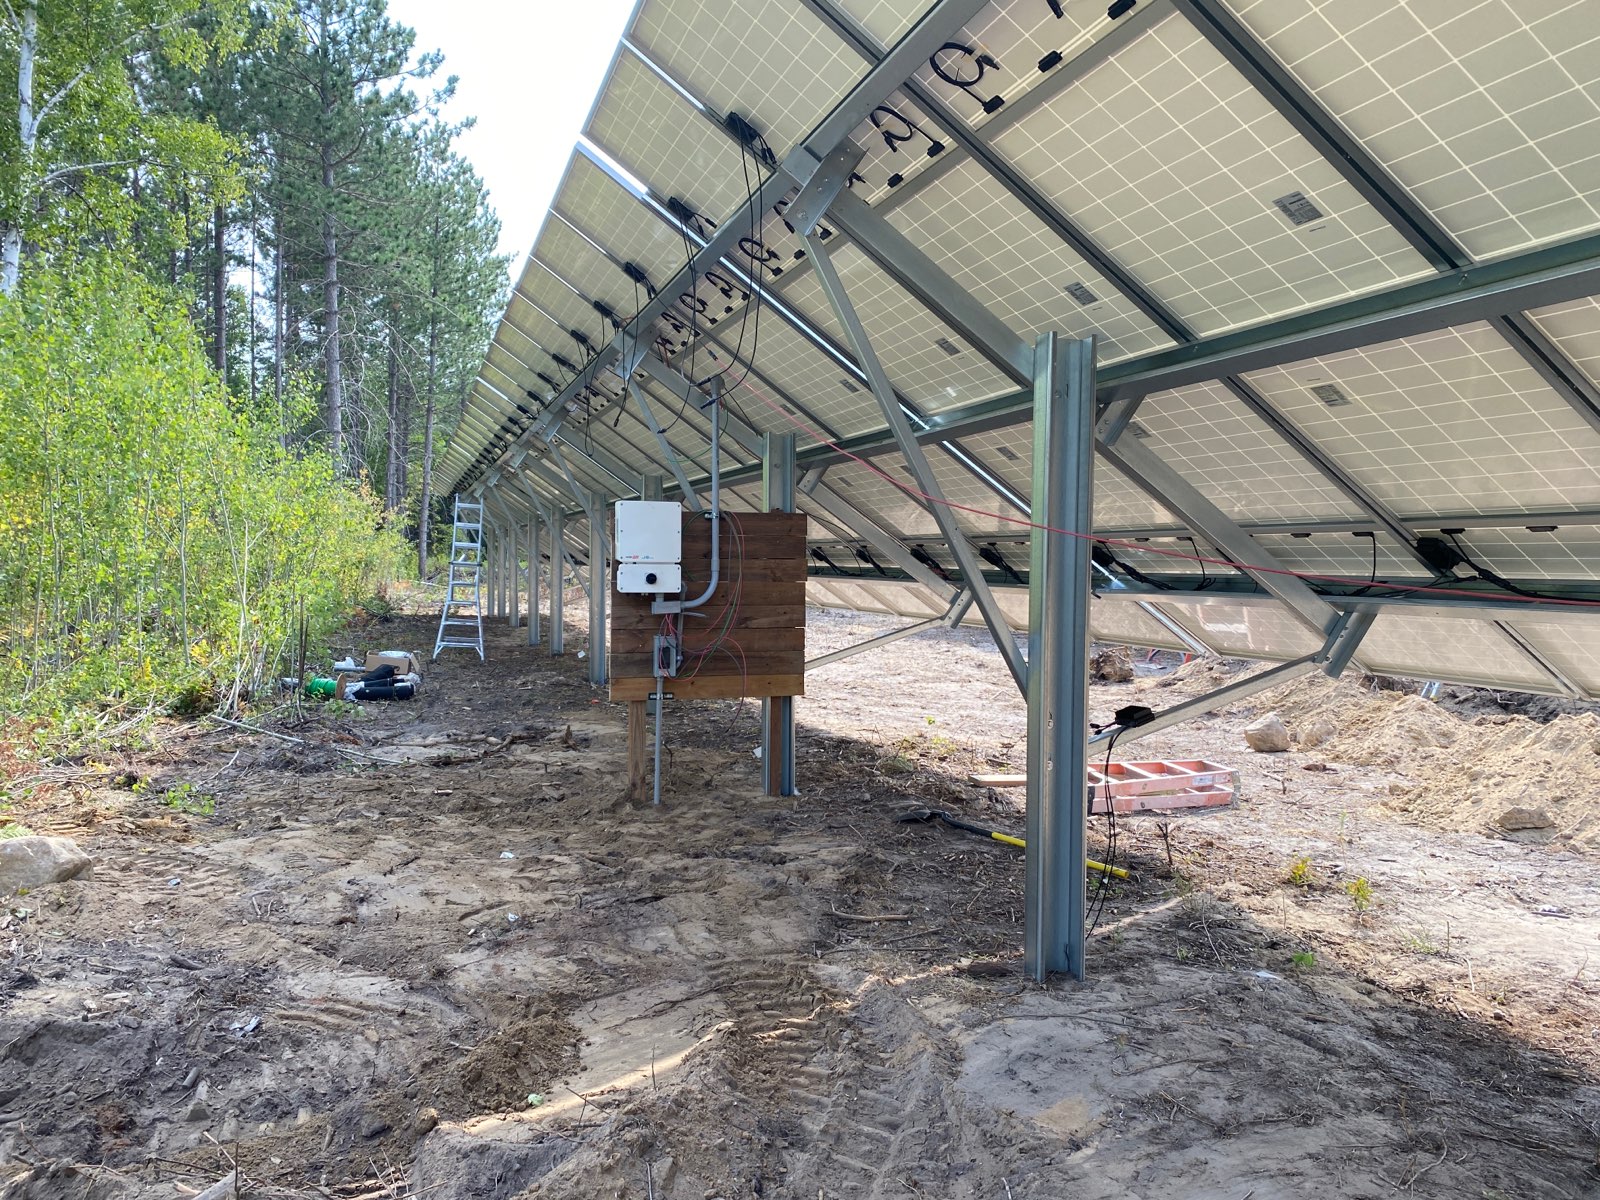 Electrical wiring under a large solar array